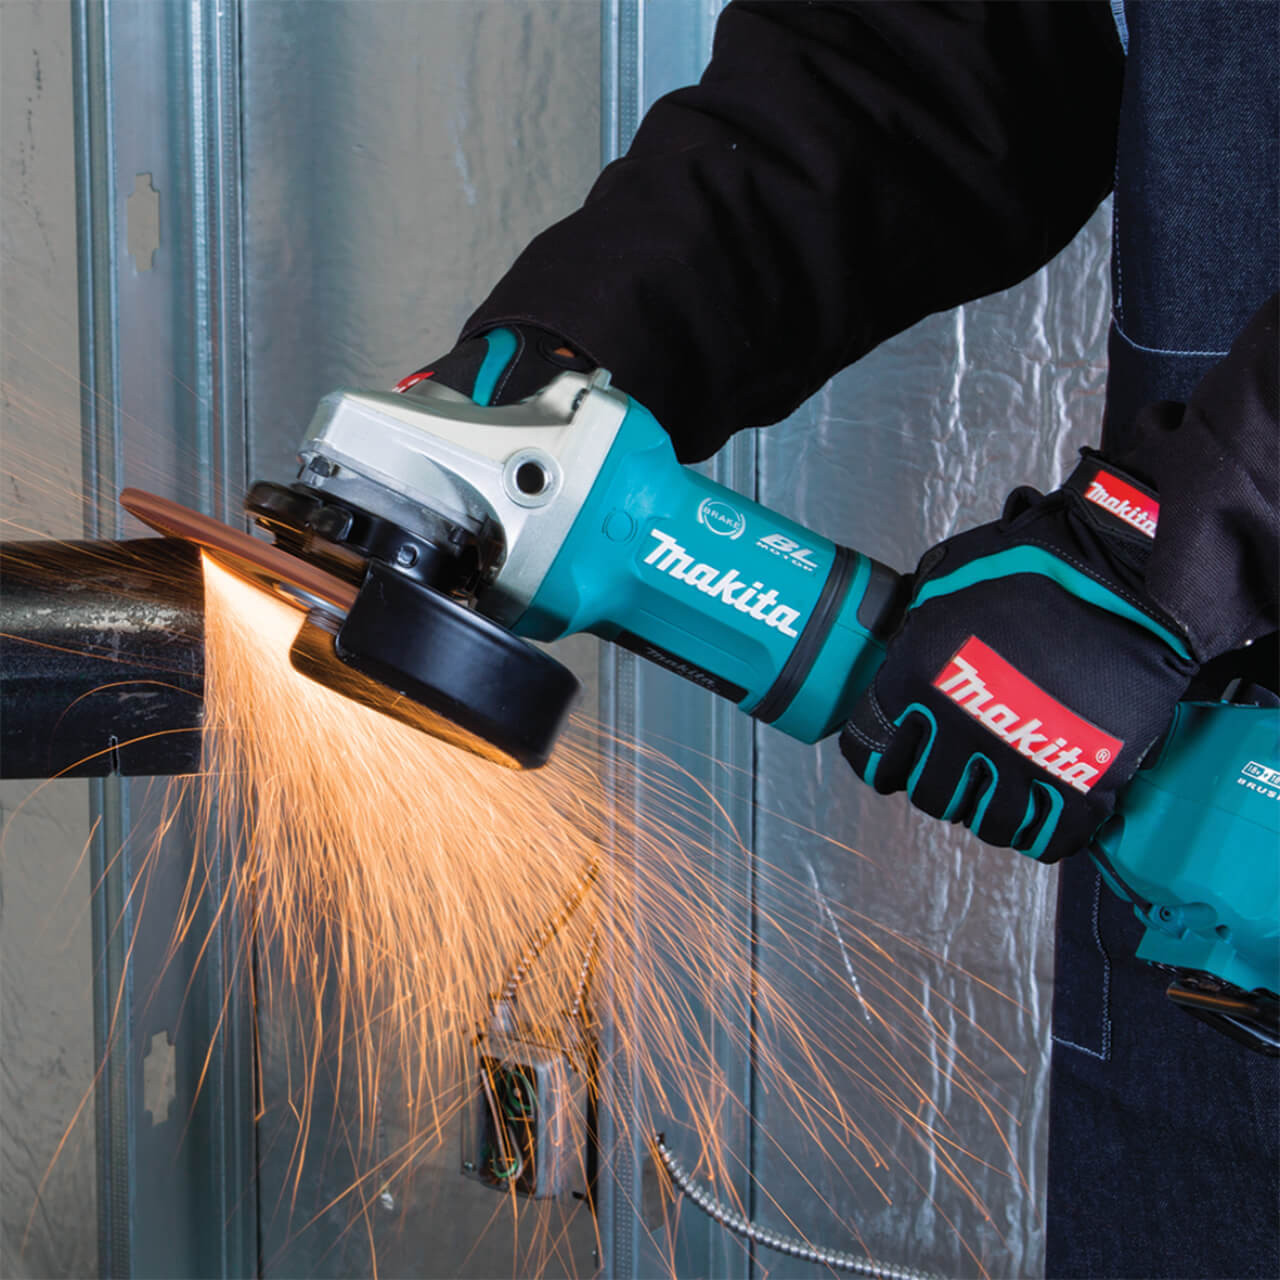 Makita 18Vx2 BRUSHLESS AWS 180mm (7”) Angle Grinder. Paddle Switch. Kick Back Detection. Electric Brake. Anti-Vib Handle & Carry Case - Tool Only